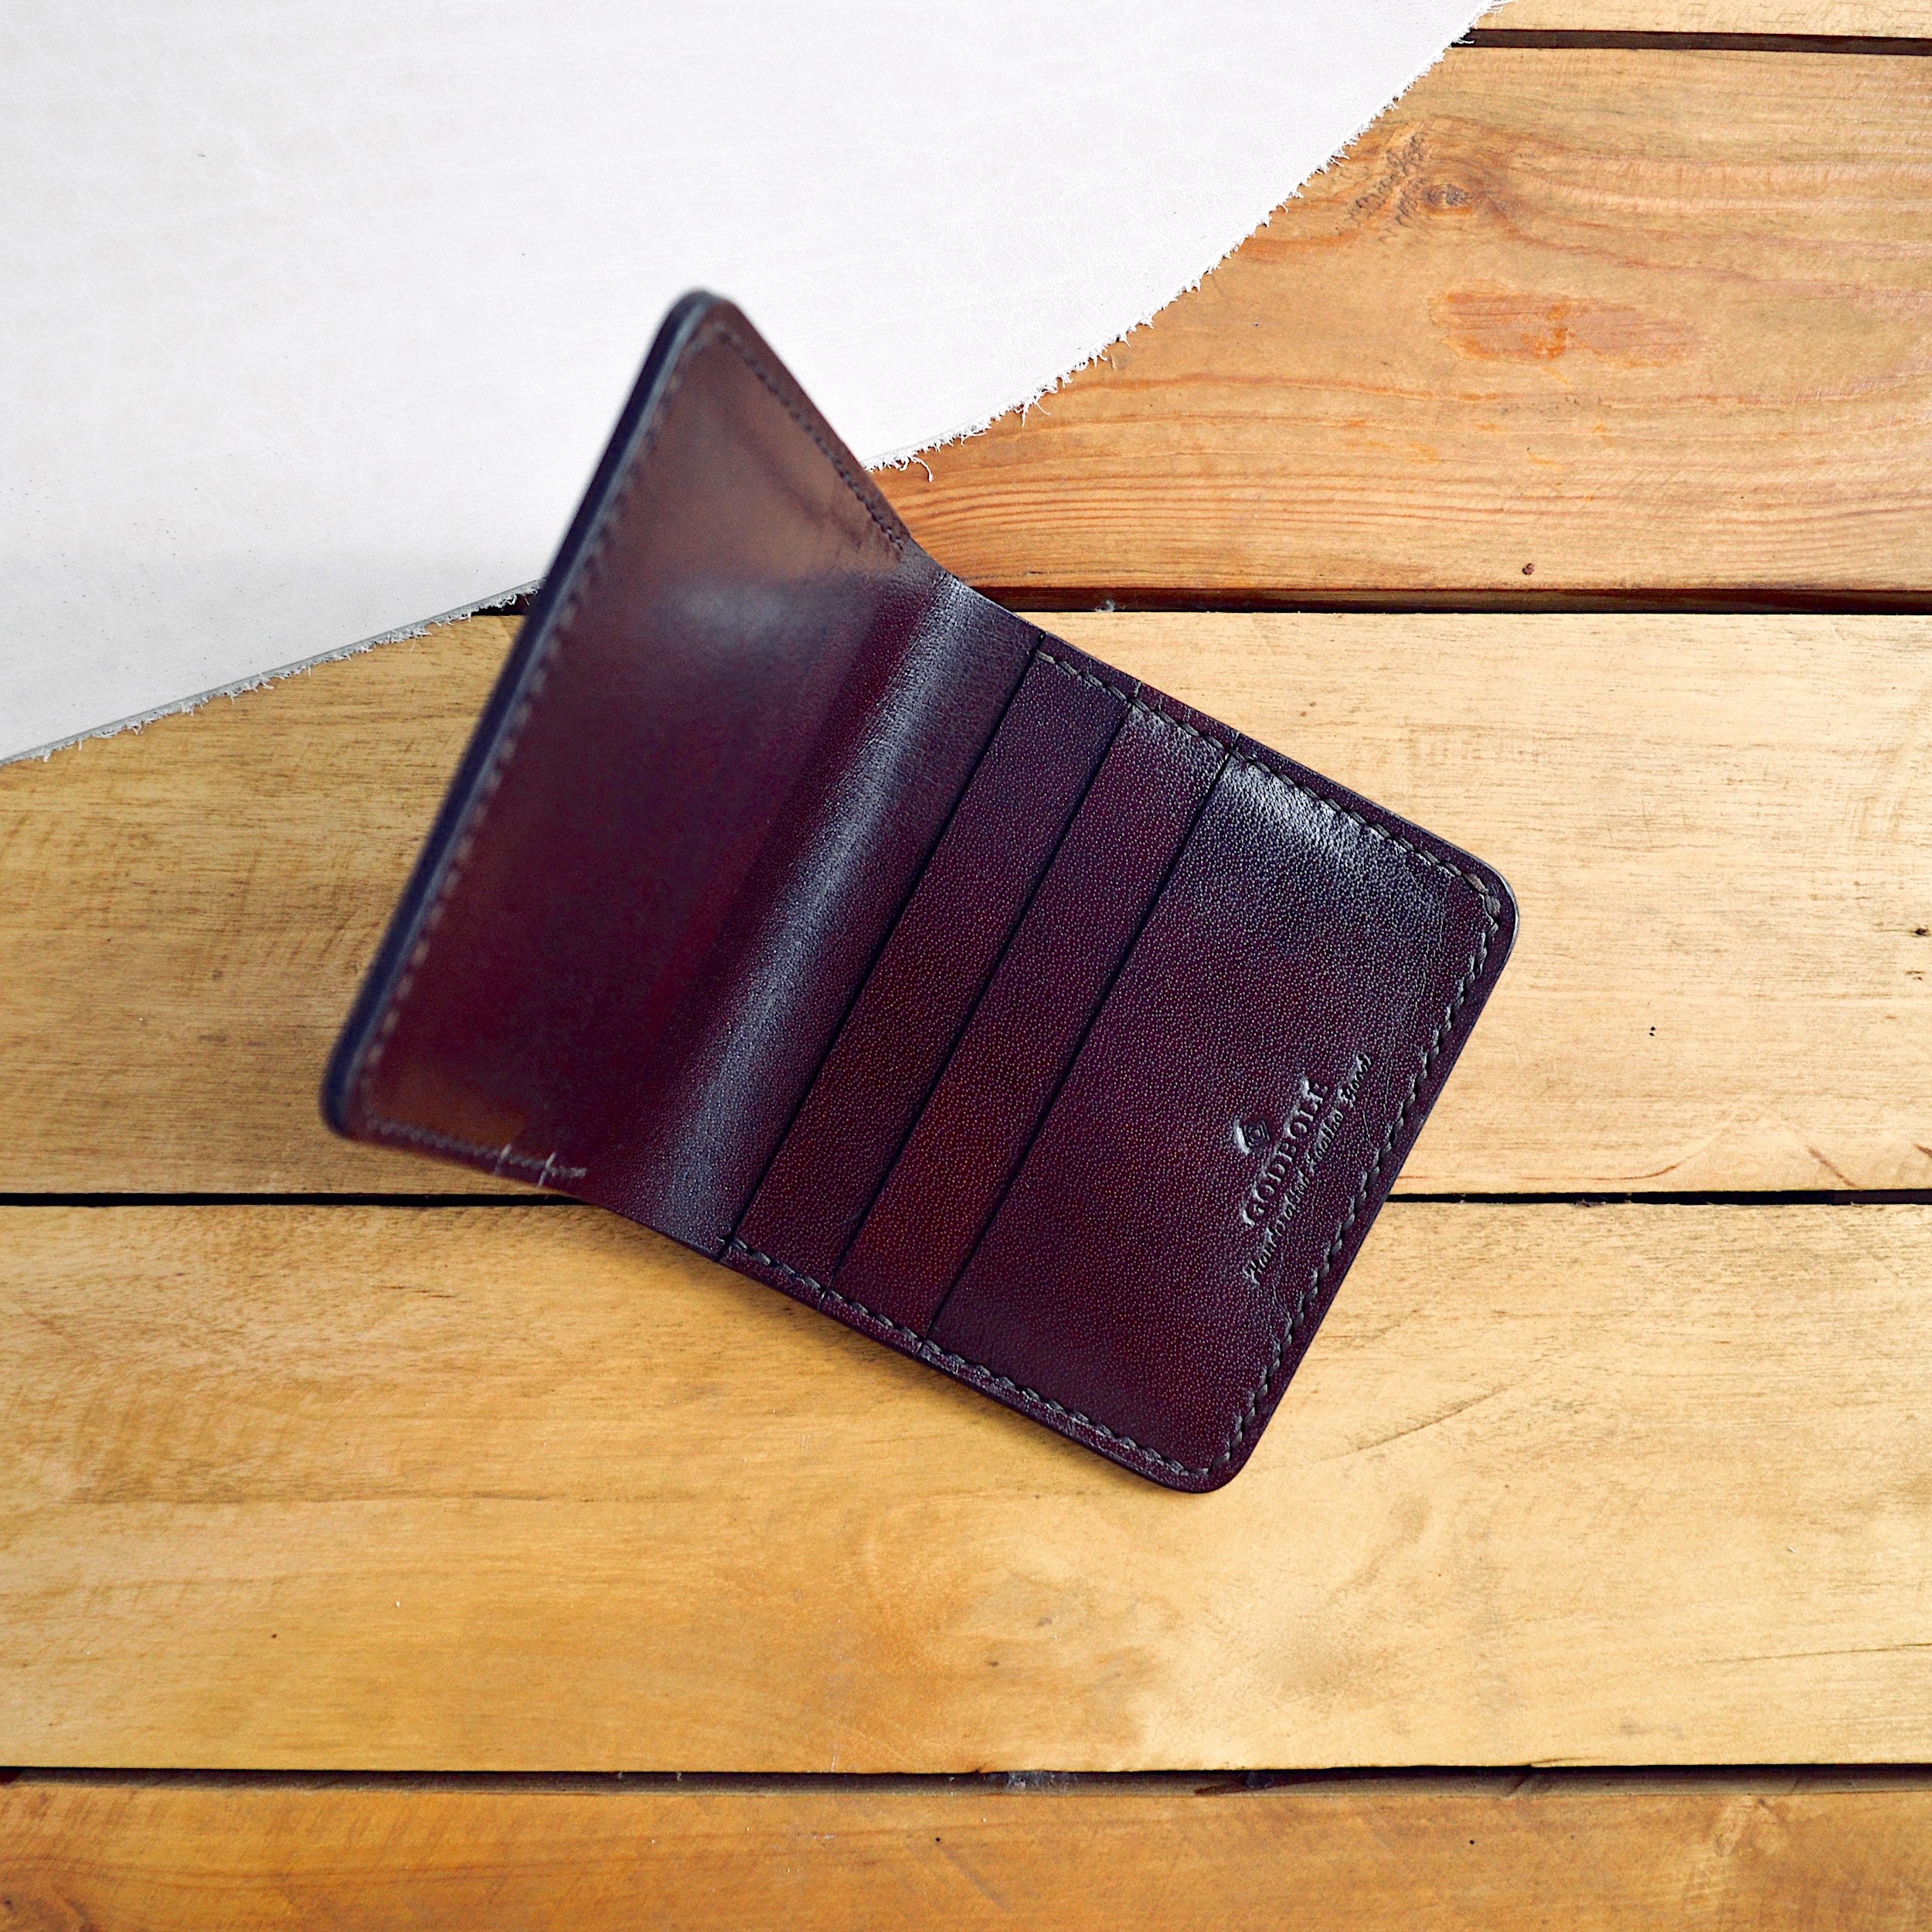 Personalized Dark Brown Leather Wallet for Men: Gift/Send Valentine's Day  Gifts Online L11153287 |IGP.com